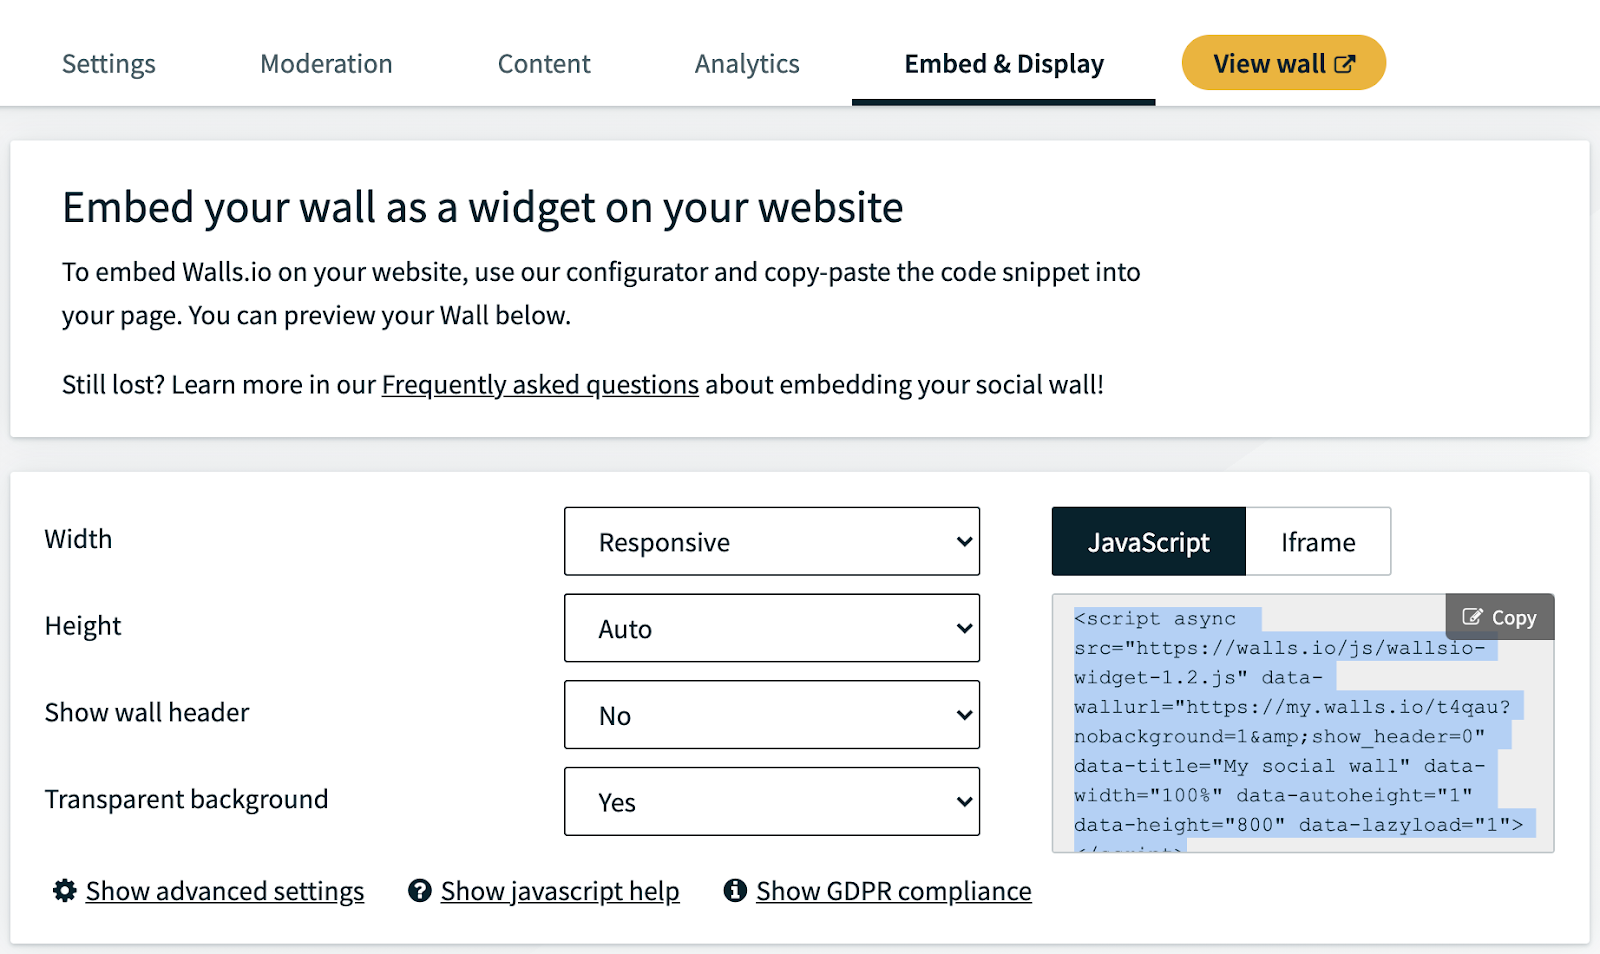 This image displays a configuration page for embedding a social media wall on a website, providing options like width, height, wall header visibility, and background transparency. It includes script code for embedding with options to switch between JavaScript and iFrame methods.